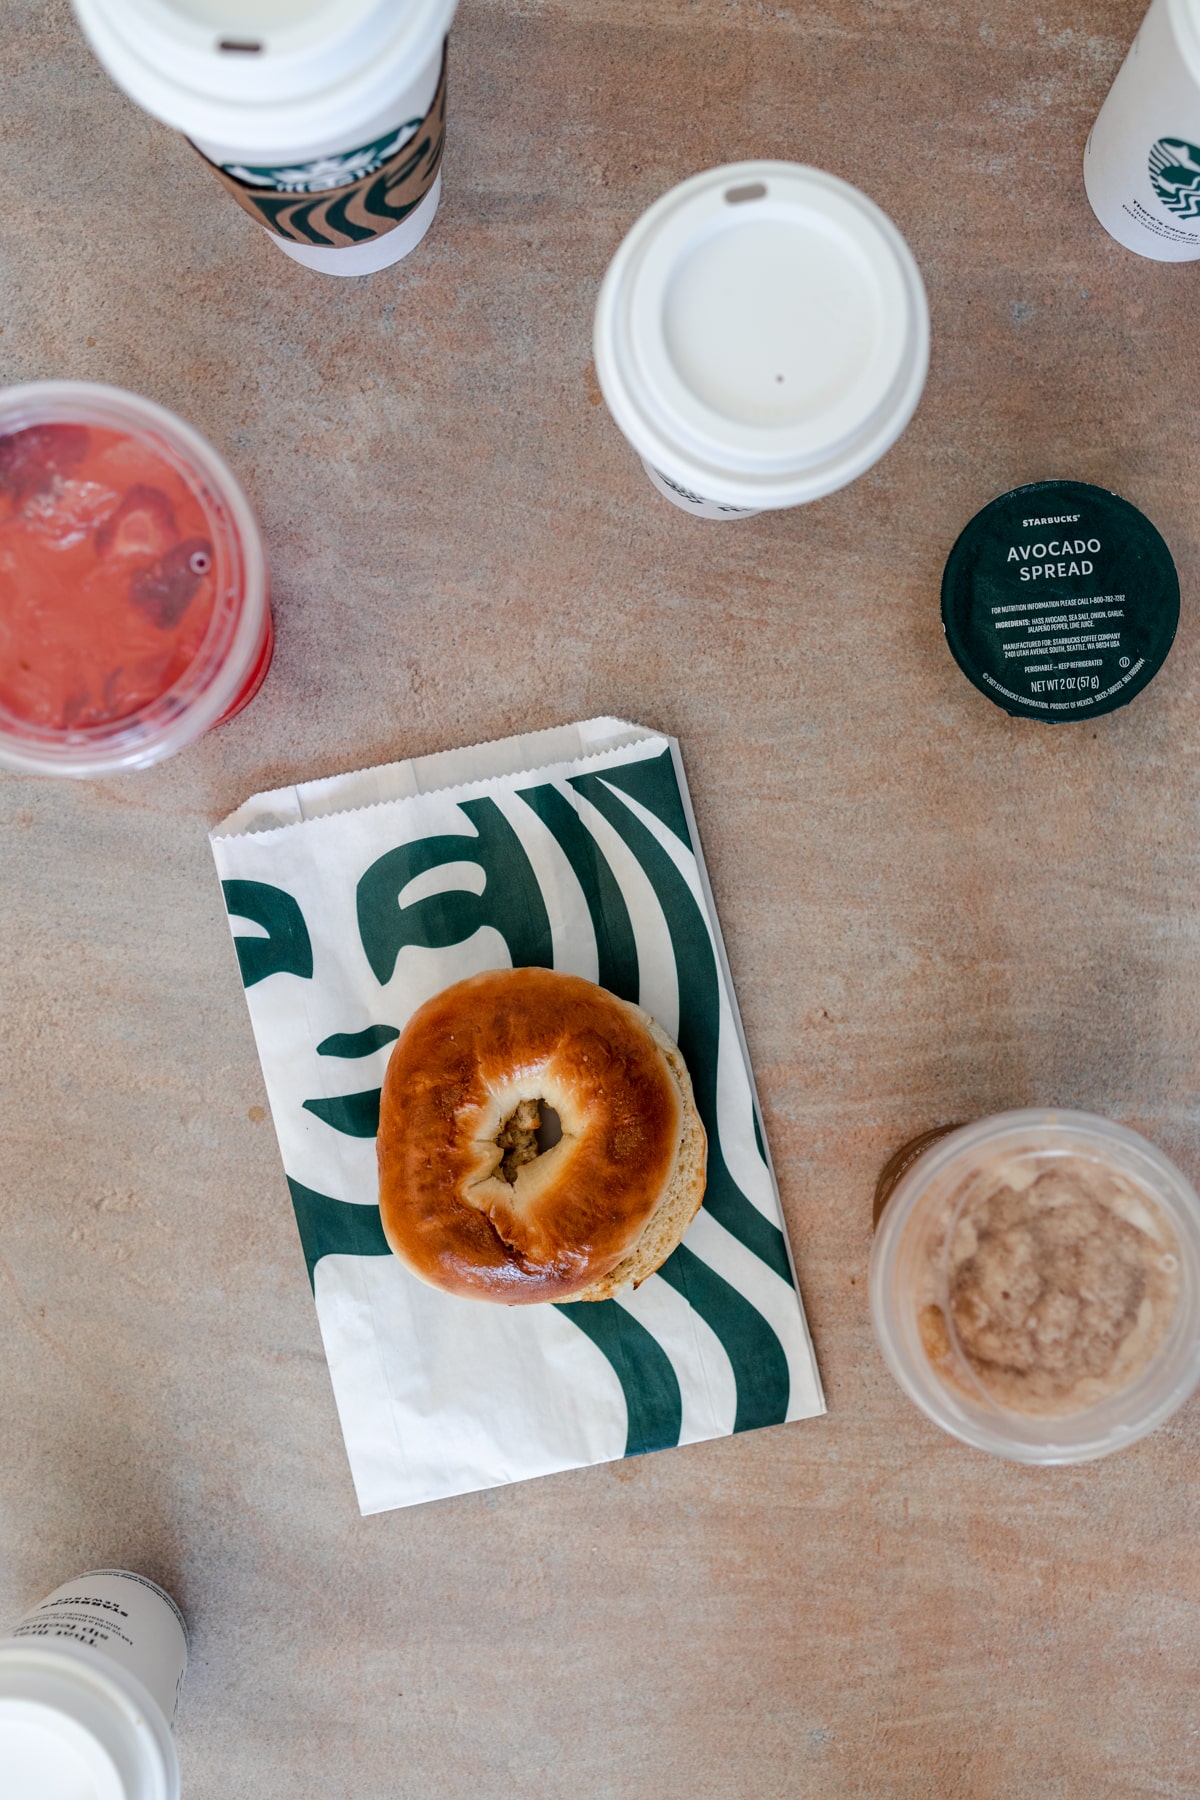 Plain bagel on a starbucks paper bag with cups around.